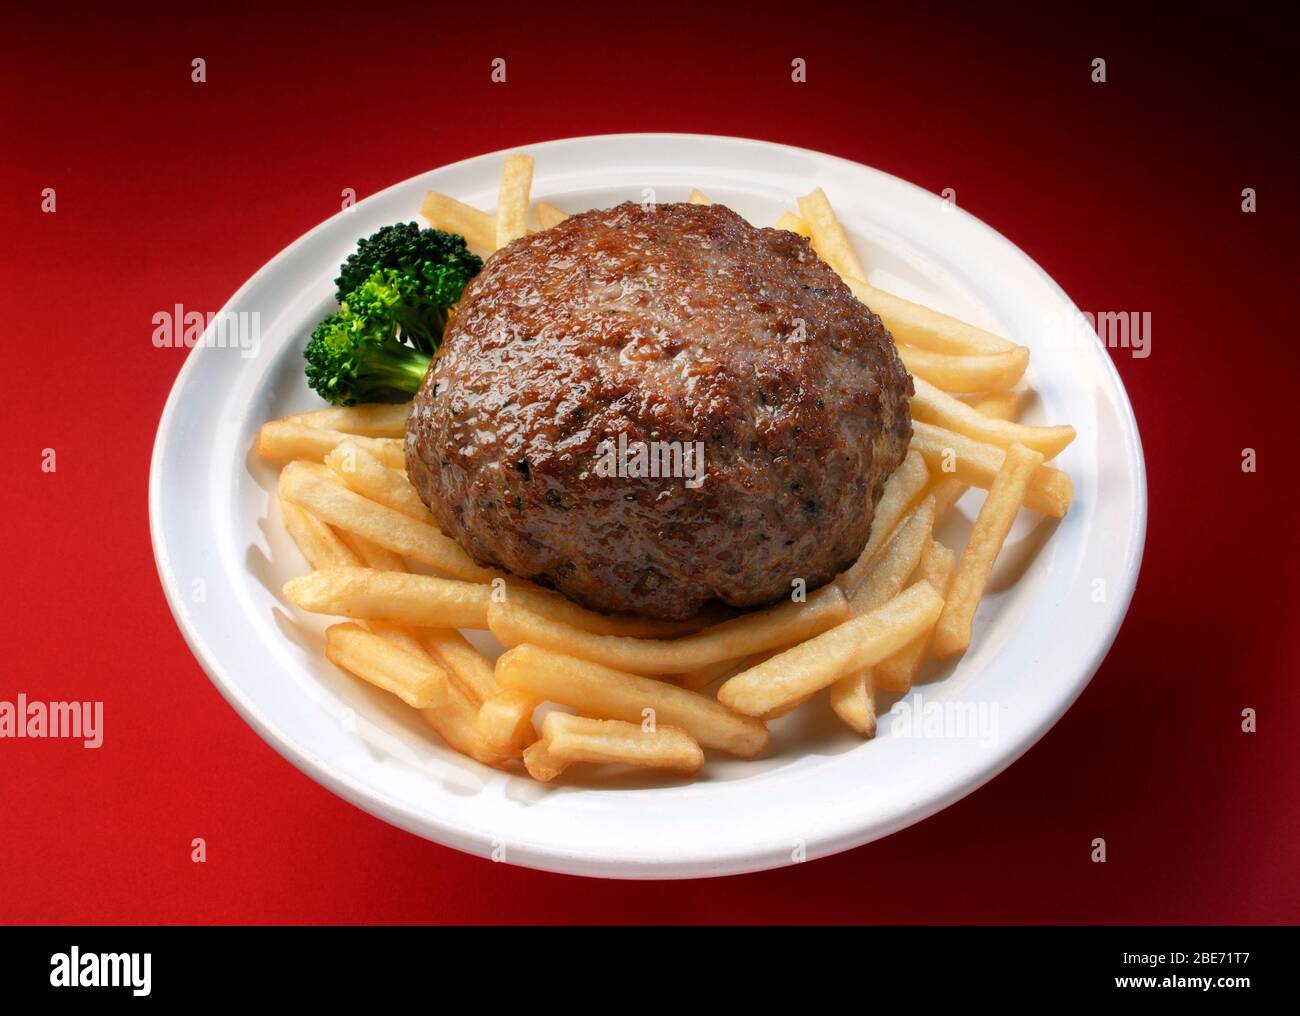 Delicious hamburger plate with french fries and broccoli Stock Photo